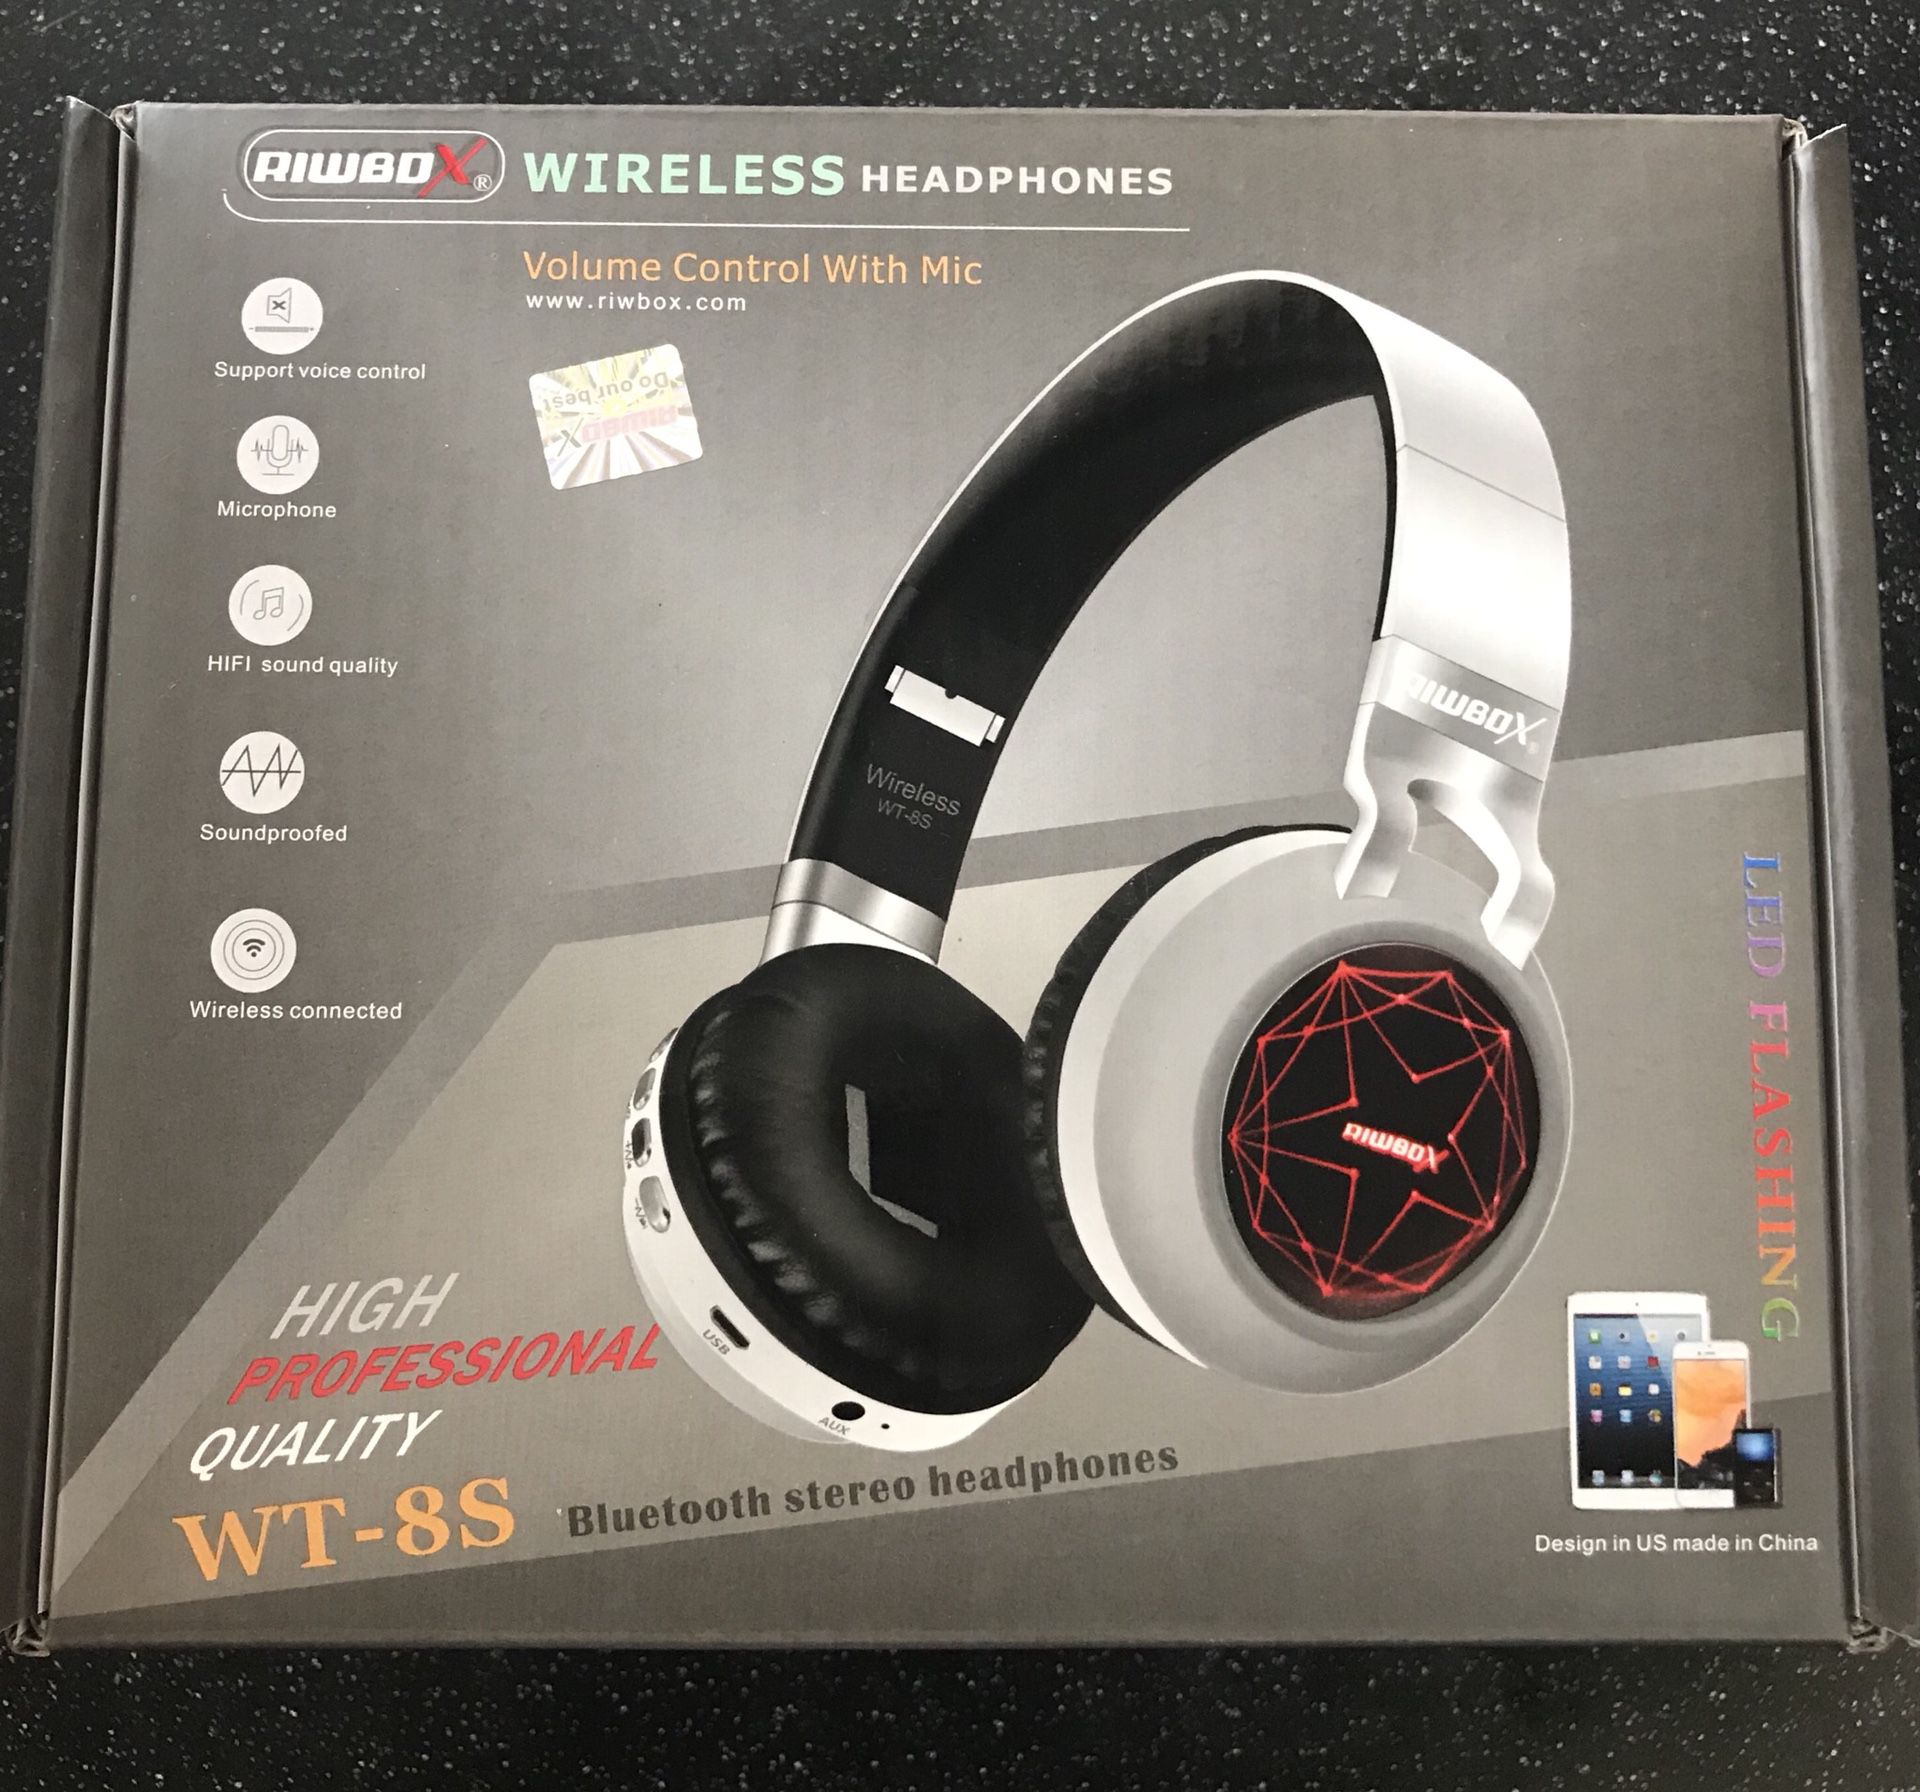 WT-8S Bluetooth Headphones, LED Light Up Wireless Headphones Over Ear Hi-Fi Stereo Foldable Wireless/Wired Headsets with Mic and TF-Card Compatible f